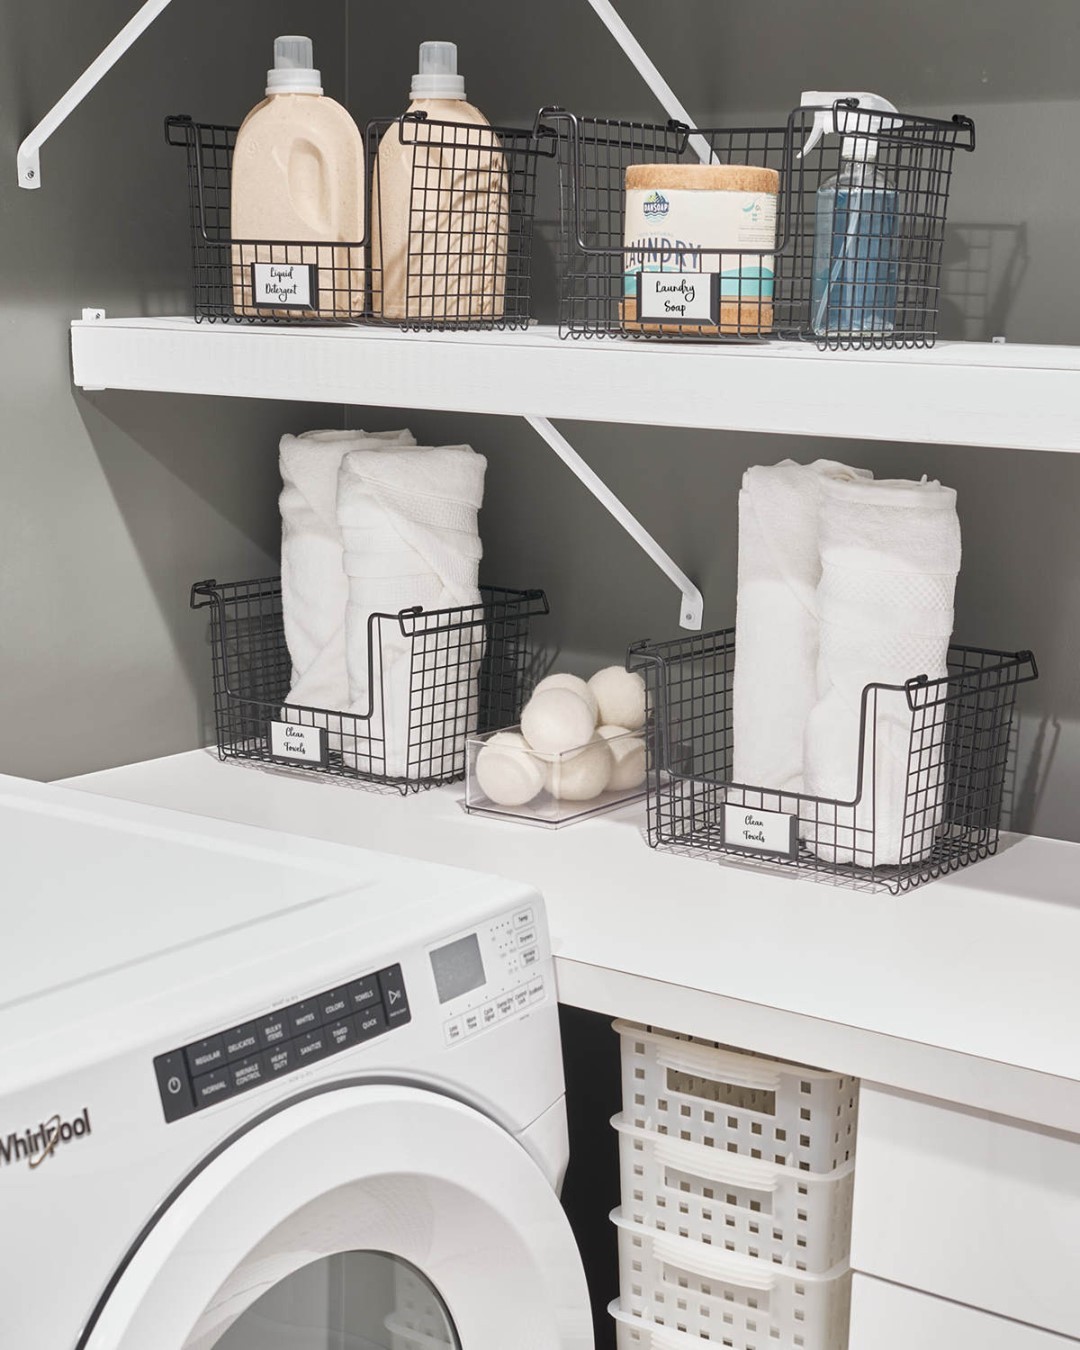 Laundry Room with Open Wire Basket Containers. Photo by Instagram user @idlivesimply